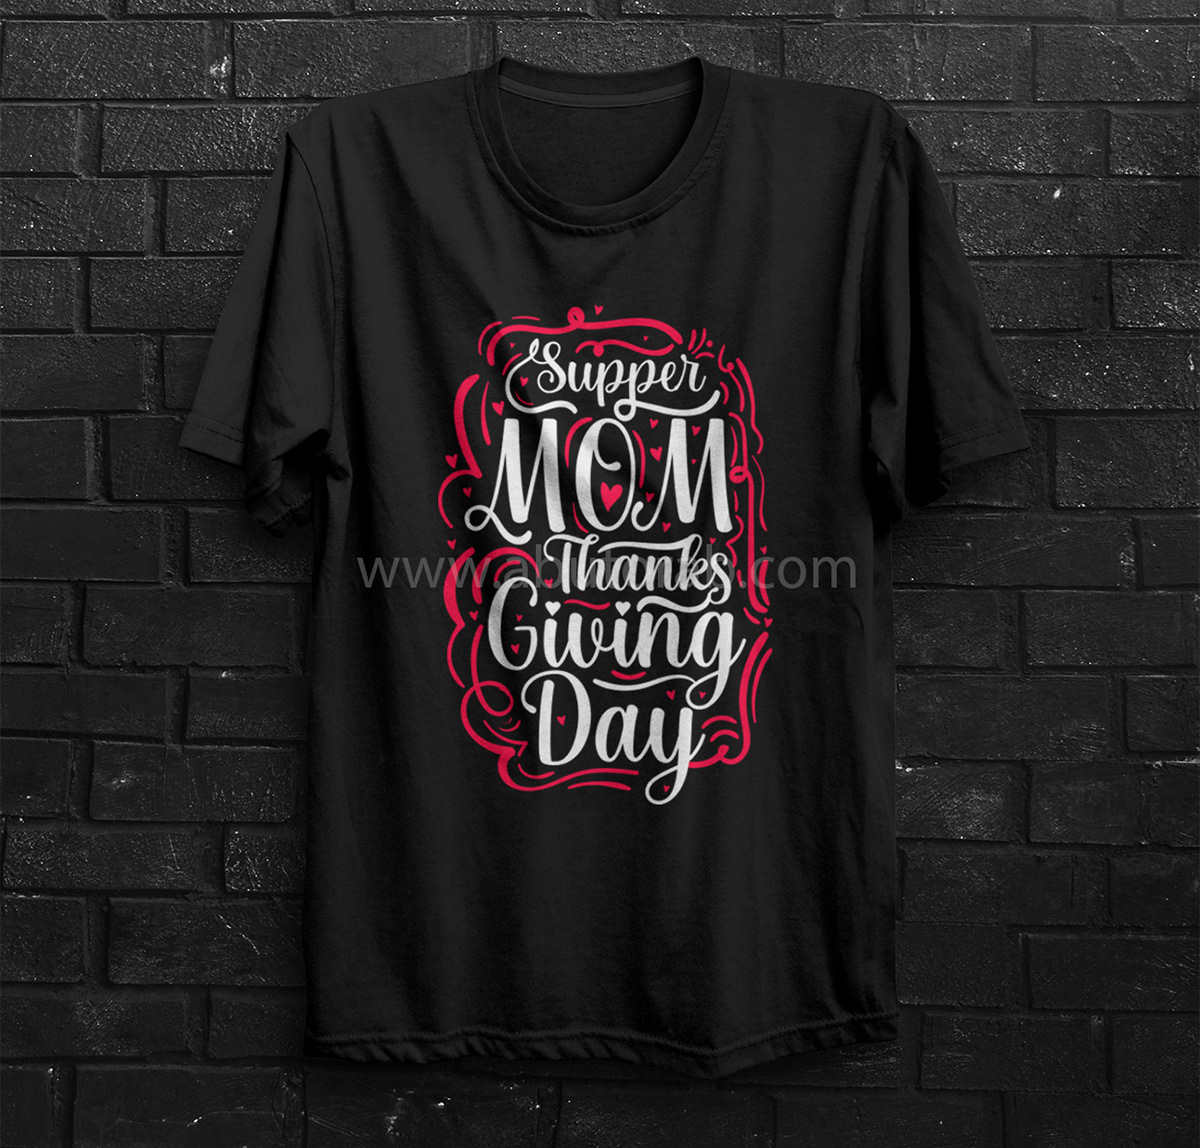 typography creative mothers day t shirt,
ornament t shirt design,
creative professional t shirt desi